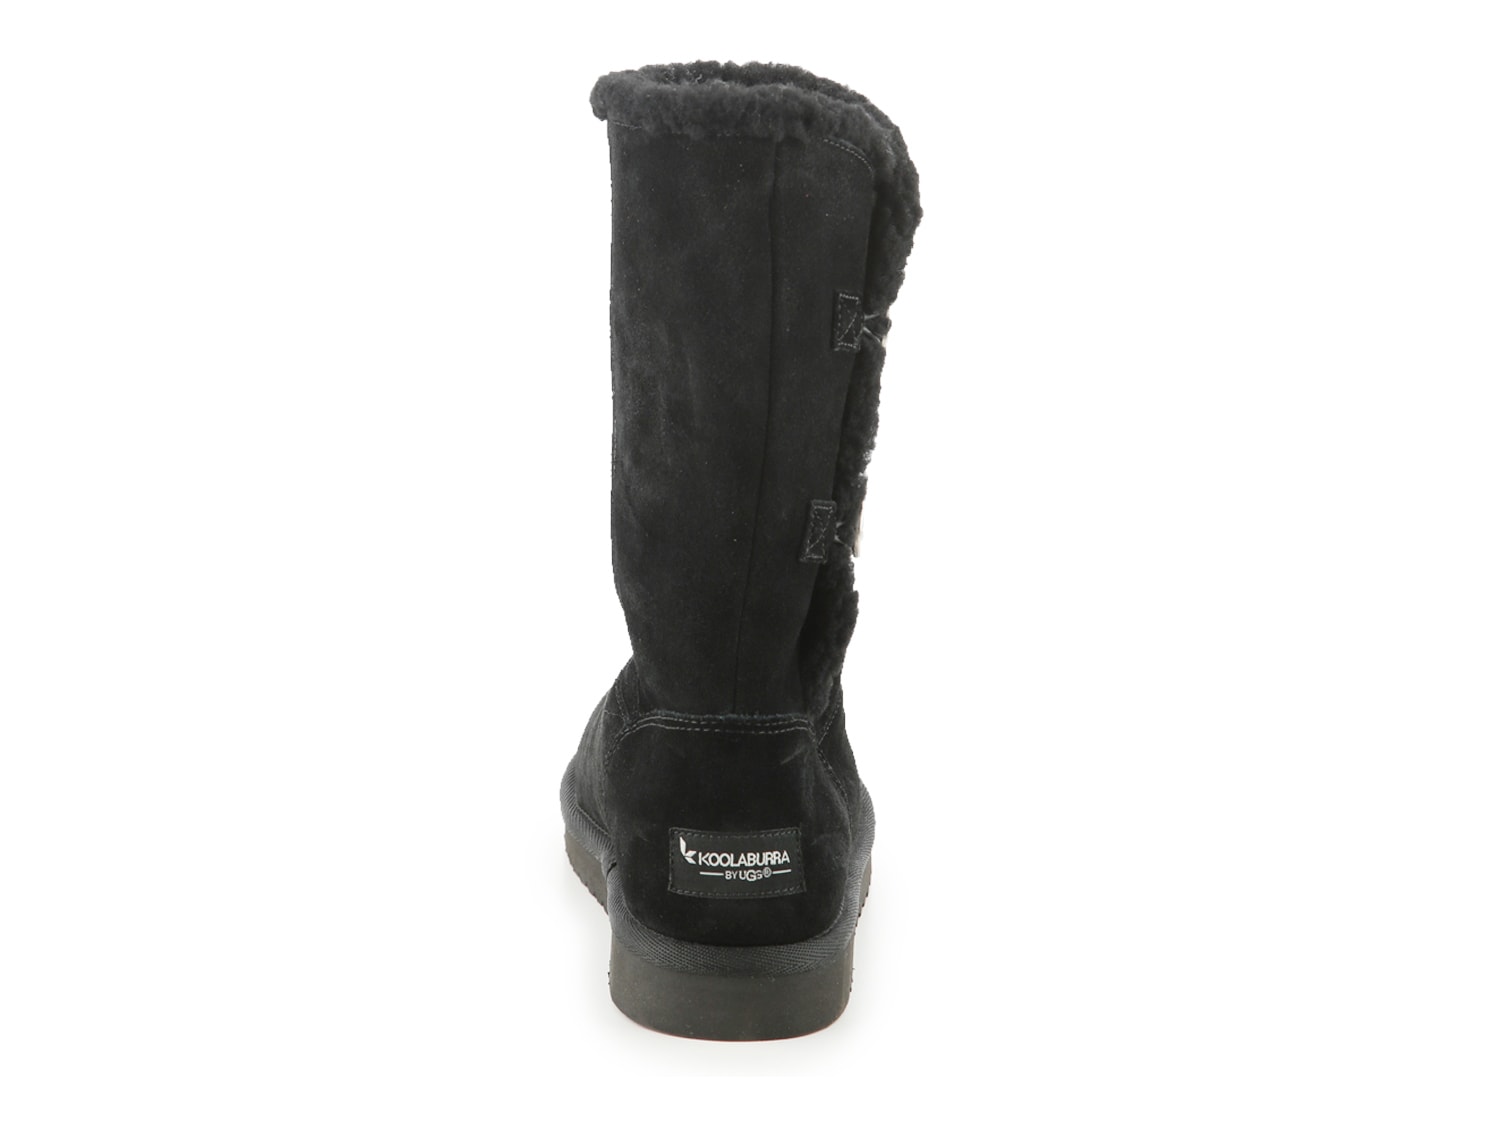 dsw ugg tall boots